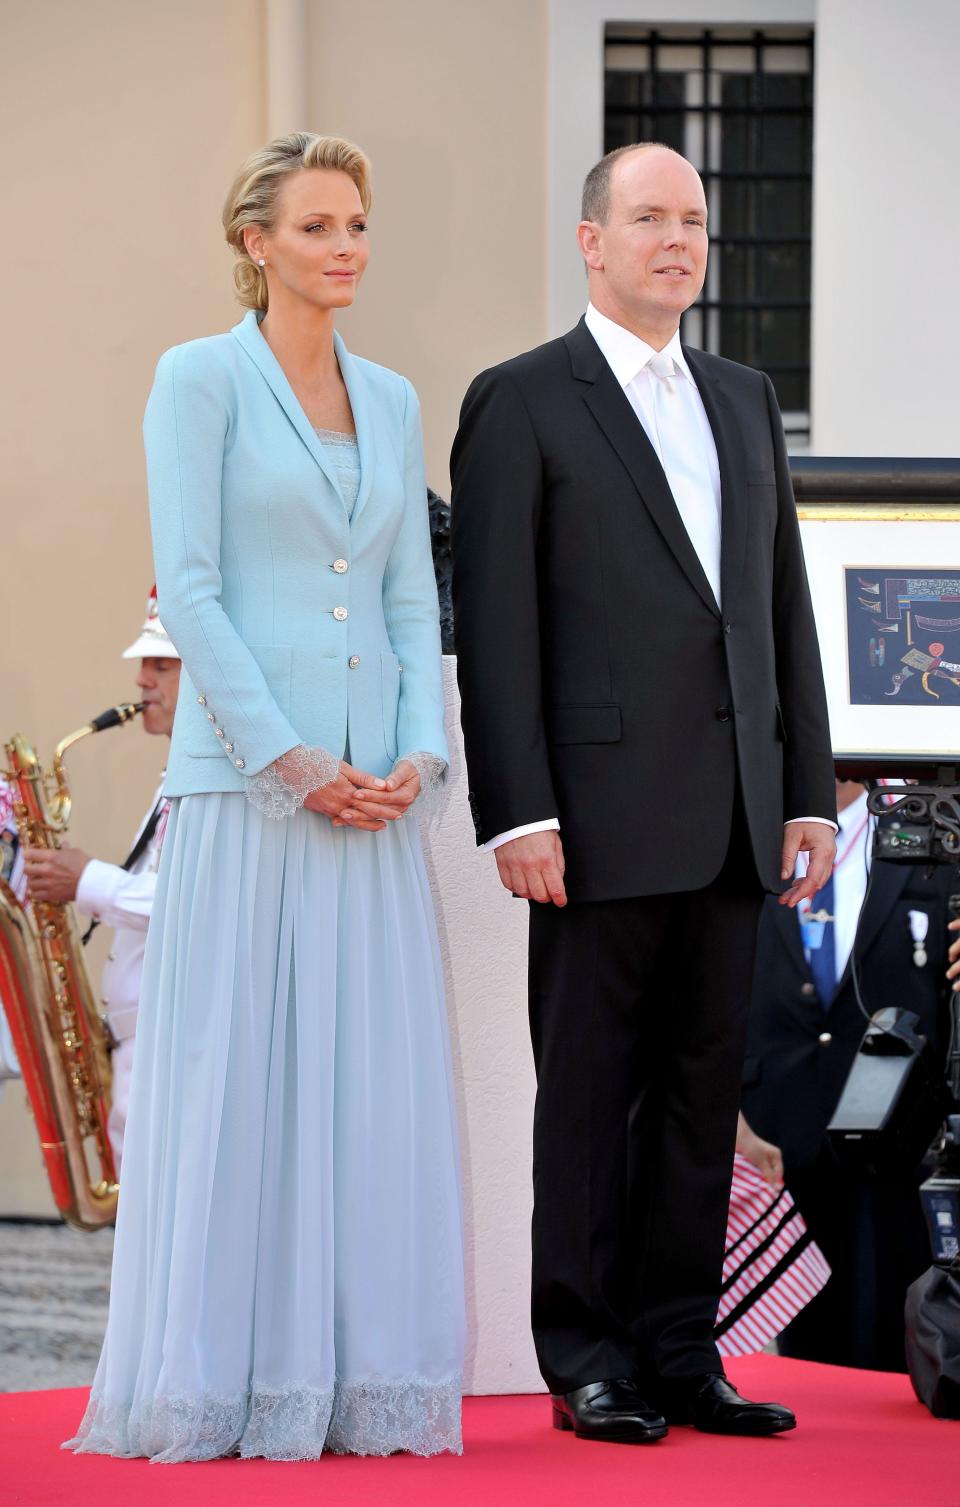 Princess Charlene and Prince Albert II after their civil marriage ceremony on July 1, 2011 in Monaco.